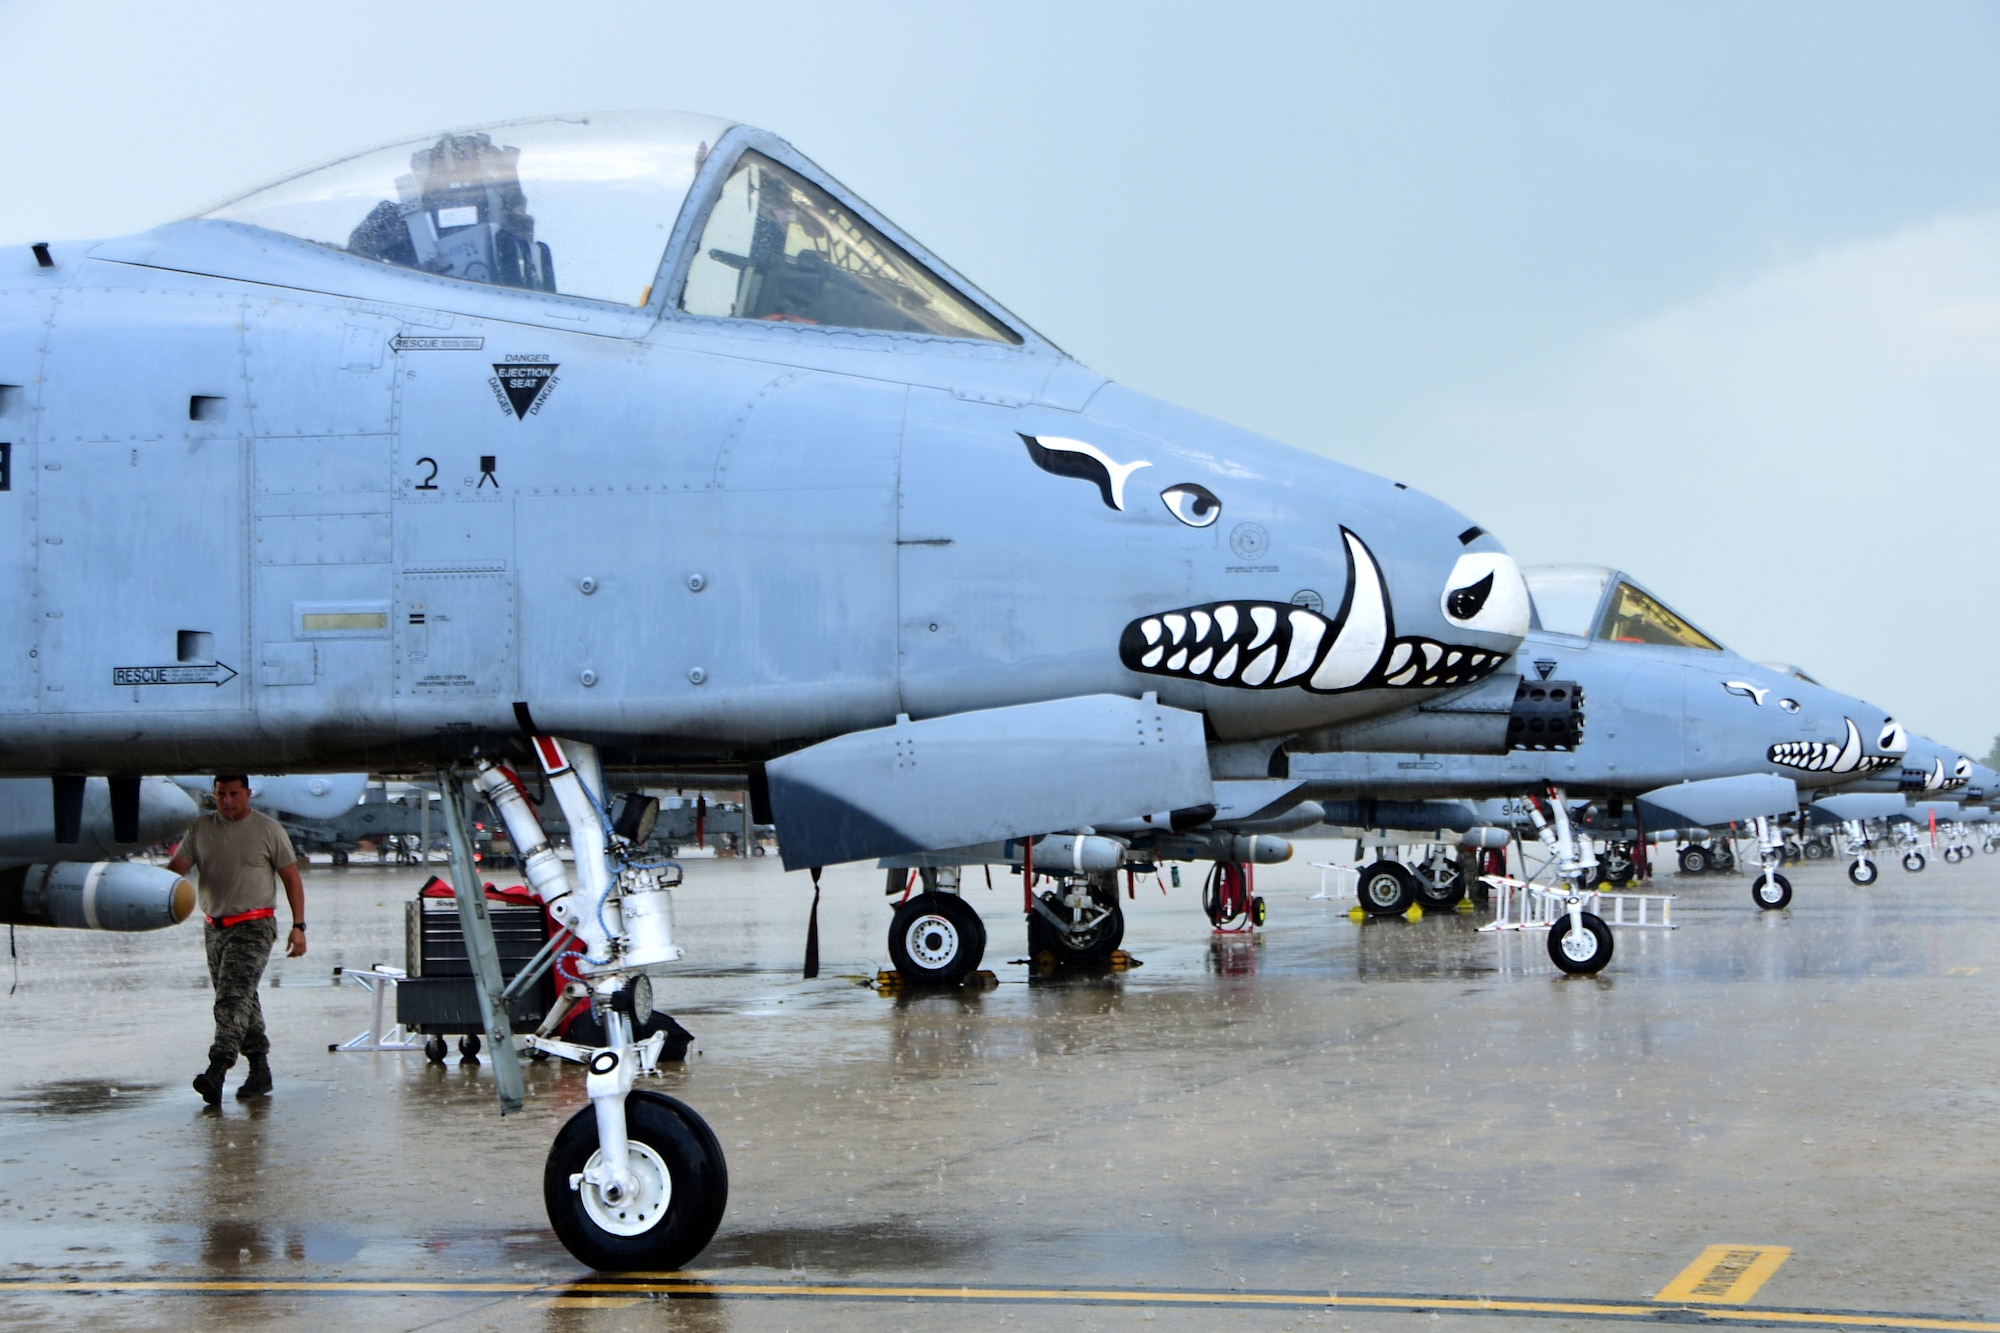 An A-10 “Warthog” from the 47th Fighter Squadron sits is parked on the flight line July 26, 2018 at Davis-Monthan AFB, Ariz.  The 47th Fighter Squadron was established on December 1, 1940 and now trains, educates, and mentors the world's finest attack pilots for the Combat Air Forces.